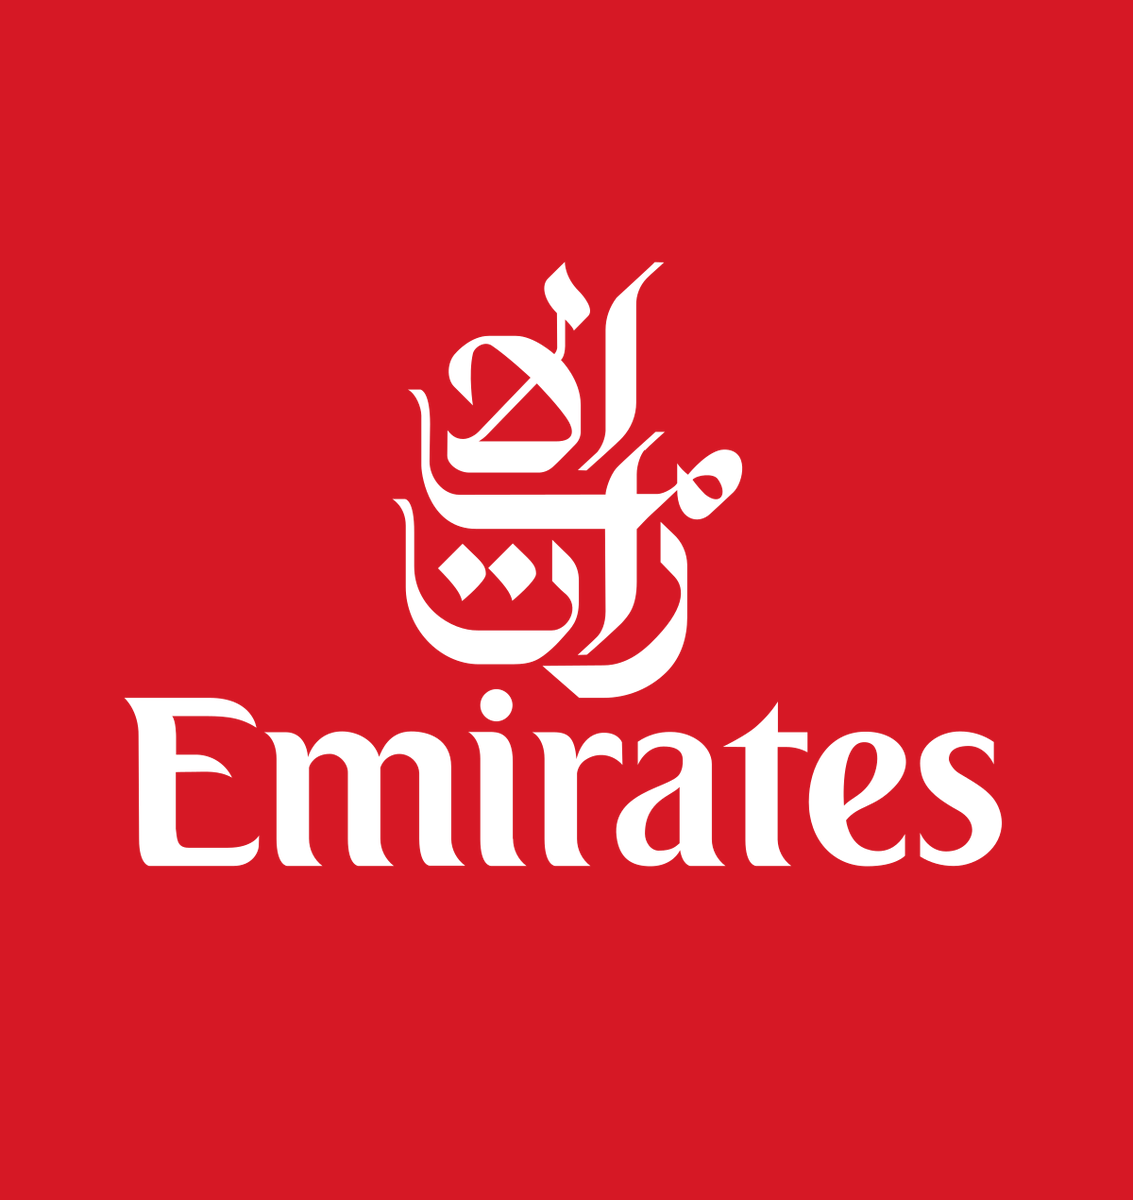 Emirates5/10, always looked like a bank logo to me